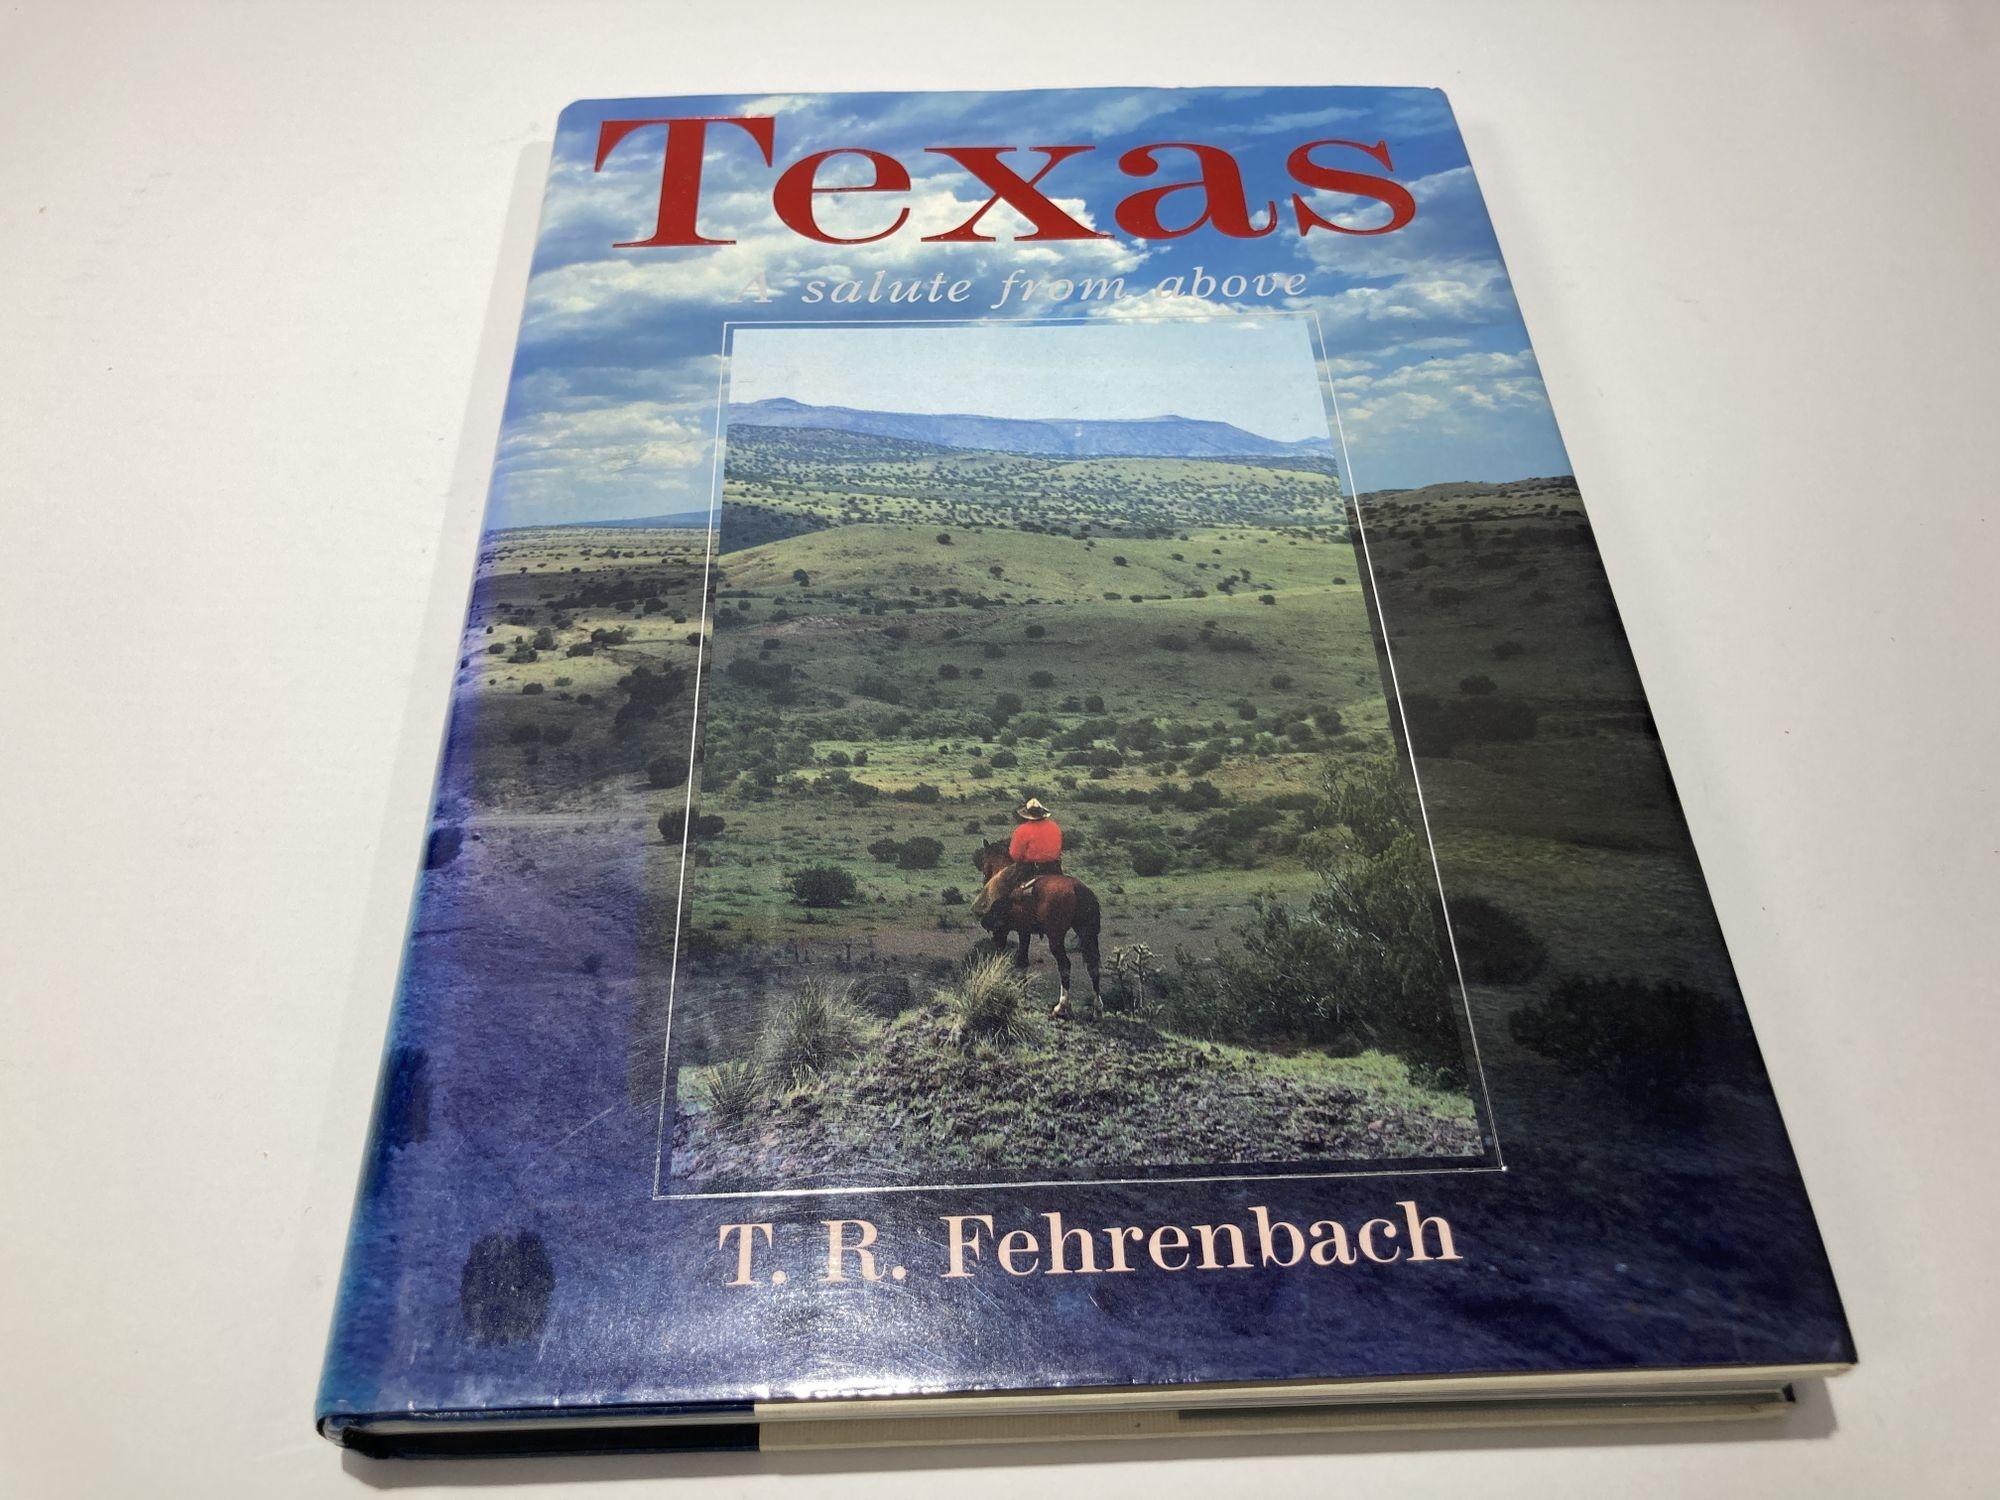 Texas a Salute from Above Fehrenbach, T. R 1985.
Title: Texas: A salute from above
Publisher: Brand: Texas Books, World Pub. Services, Inc.
Publication Date: 1st Edition 1985
Language ? : ? English
Hardcover ? : ? 280 pages
Binding: Hardcover